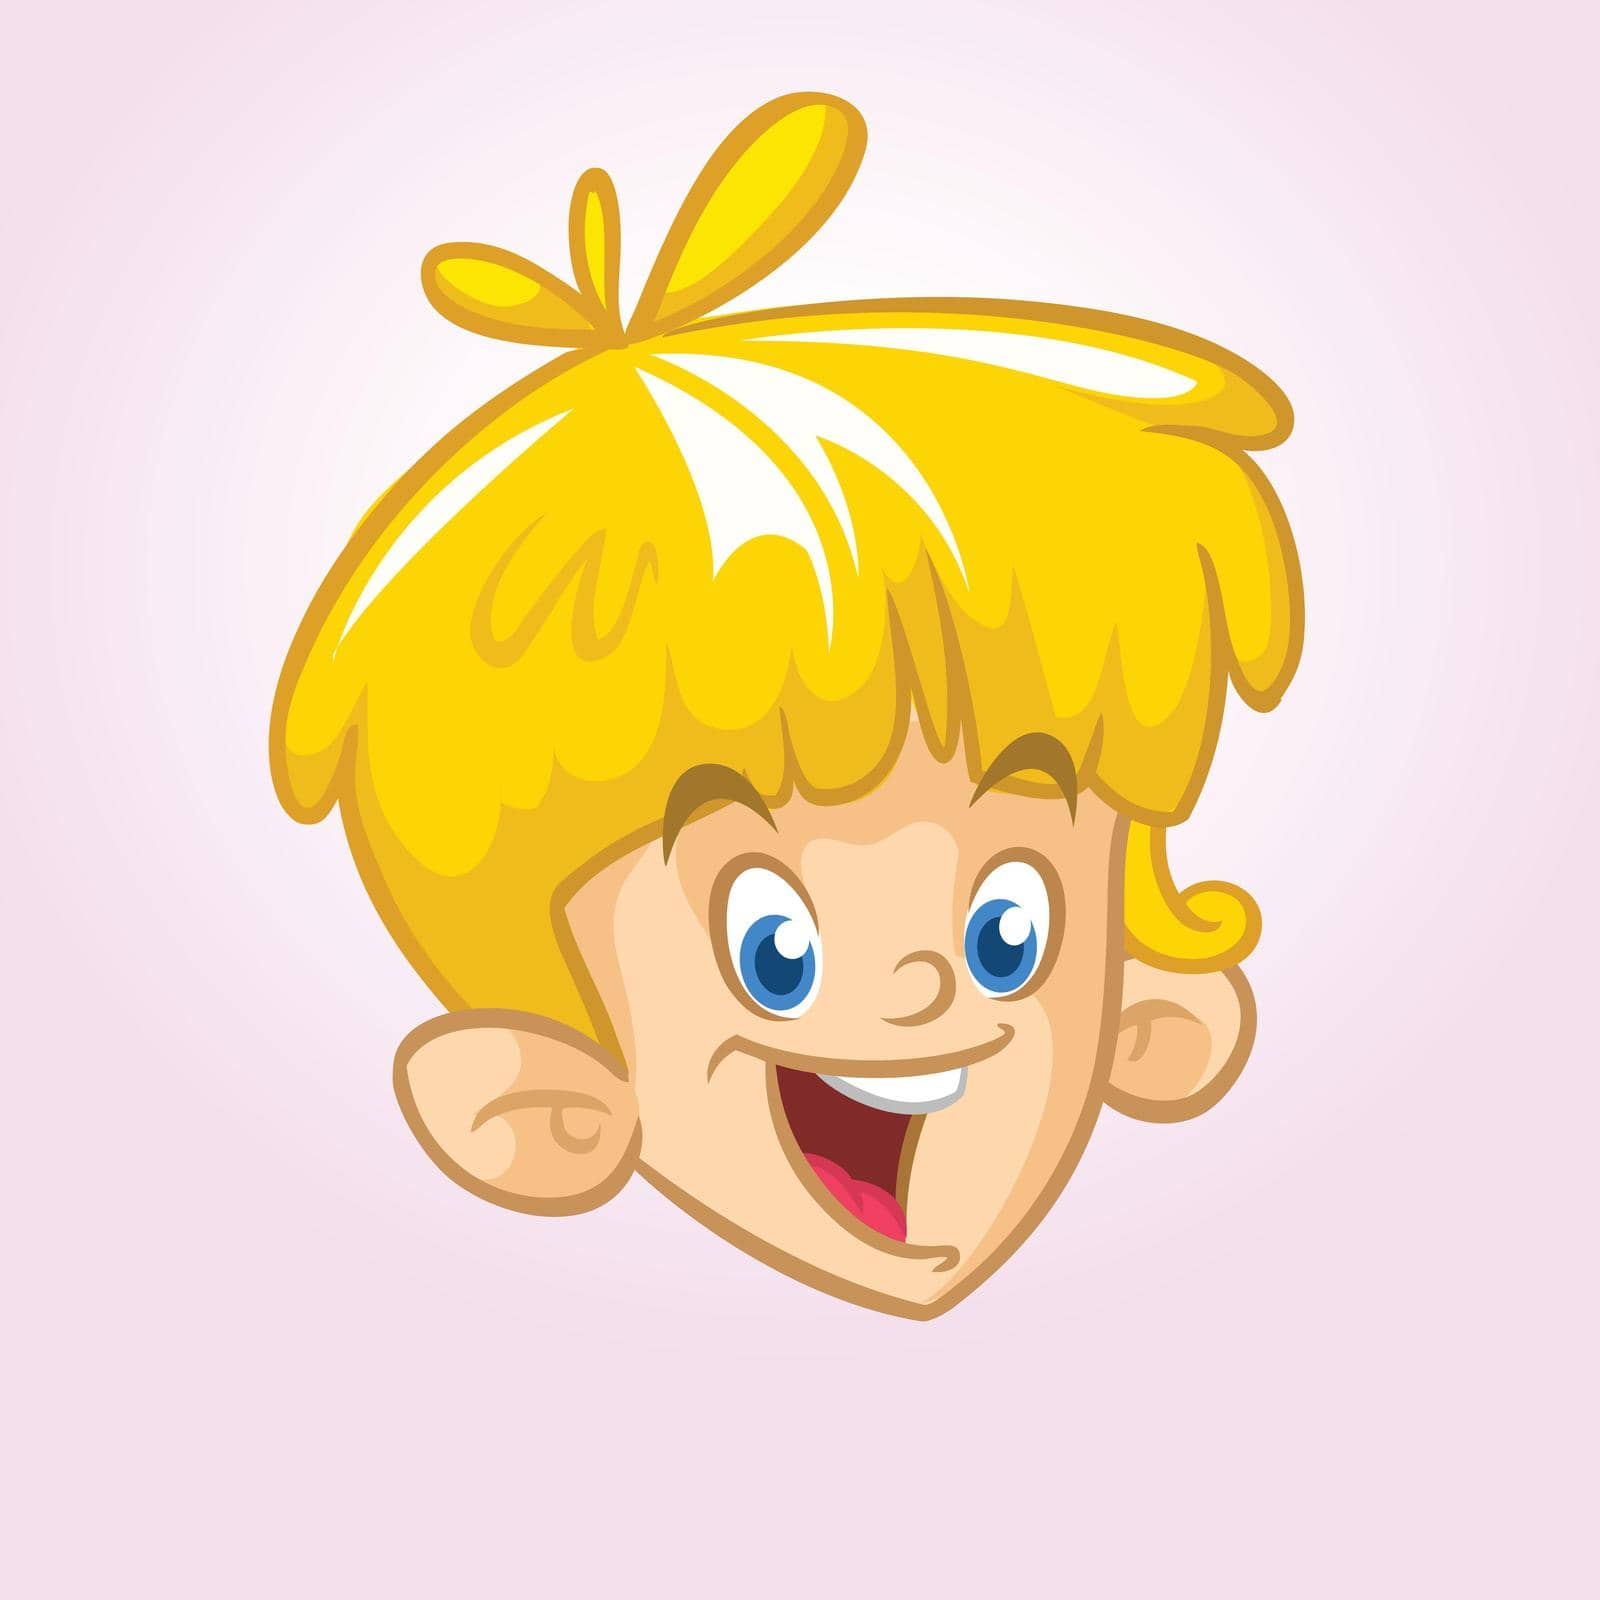 Cartoon small blond boy. Vector illustration of young teenager outlined. Boy head icon by drawkman